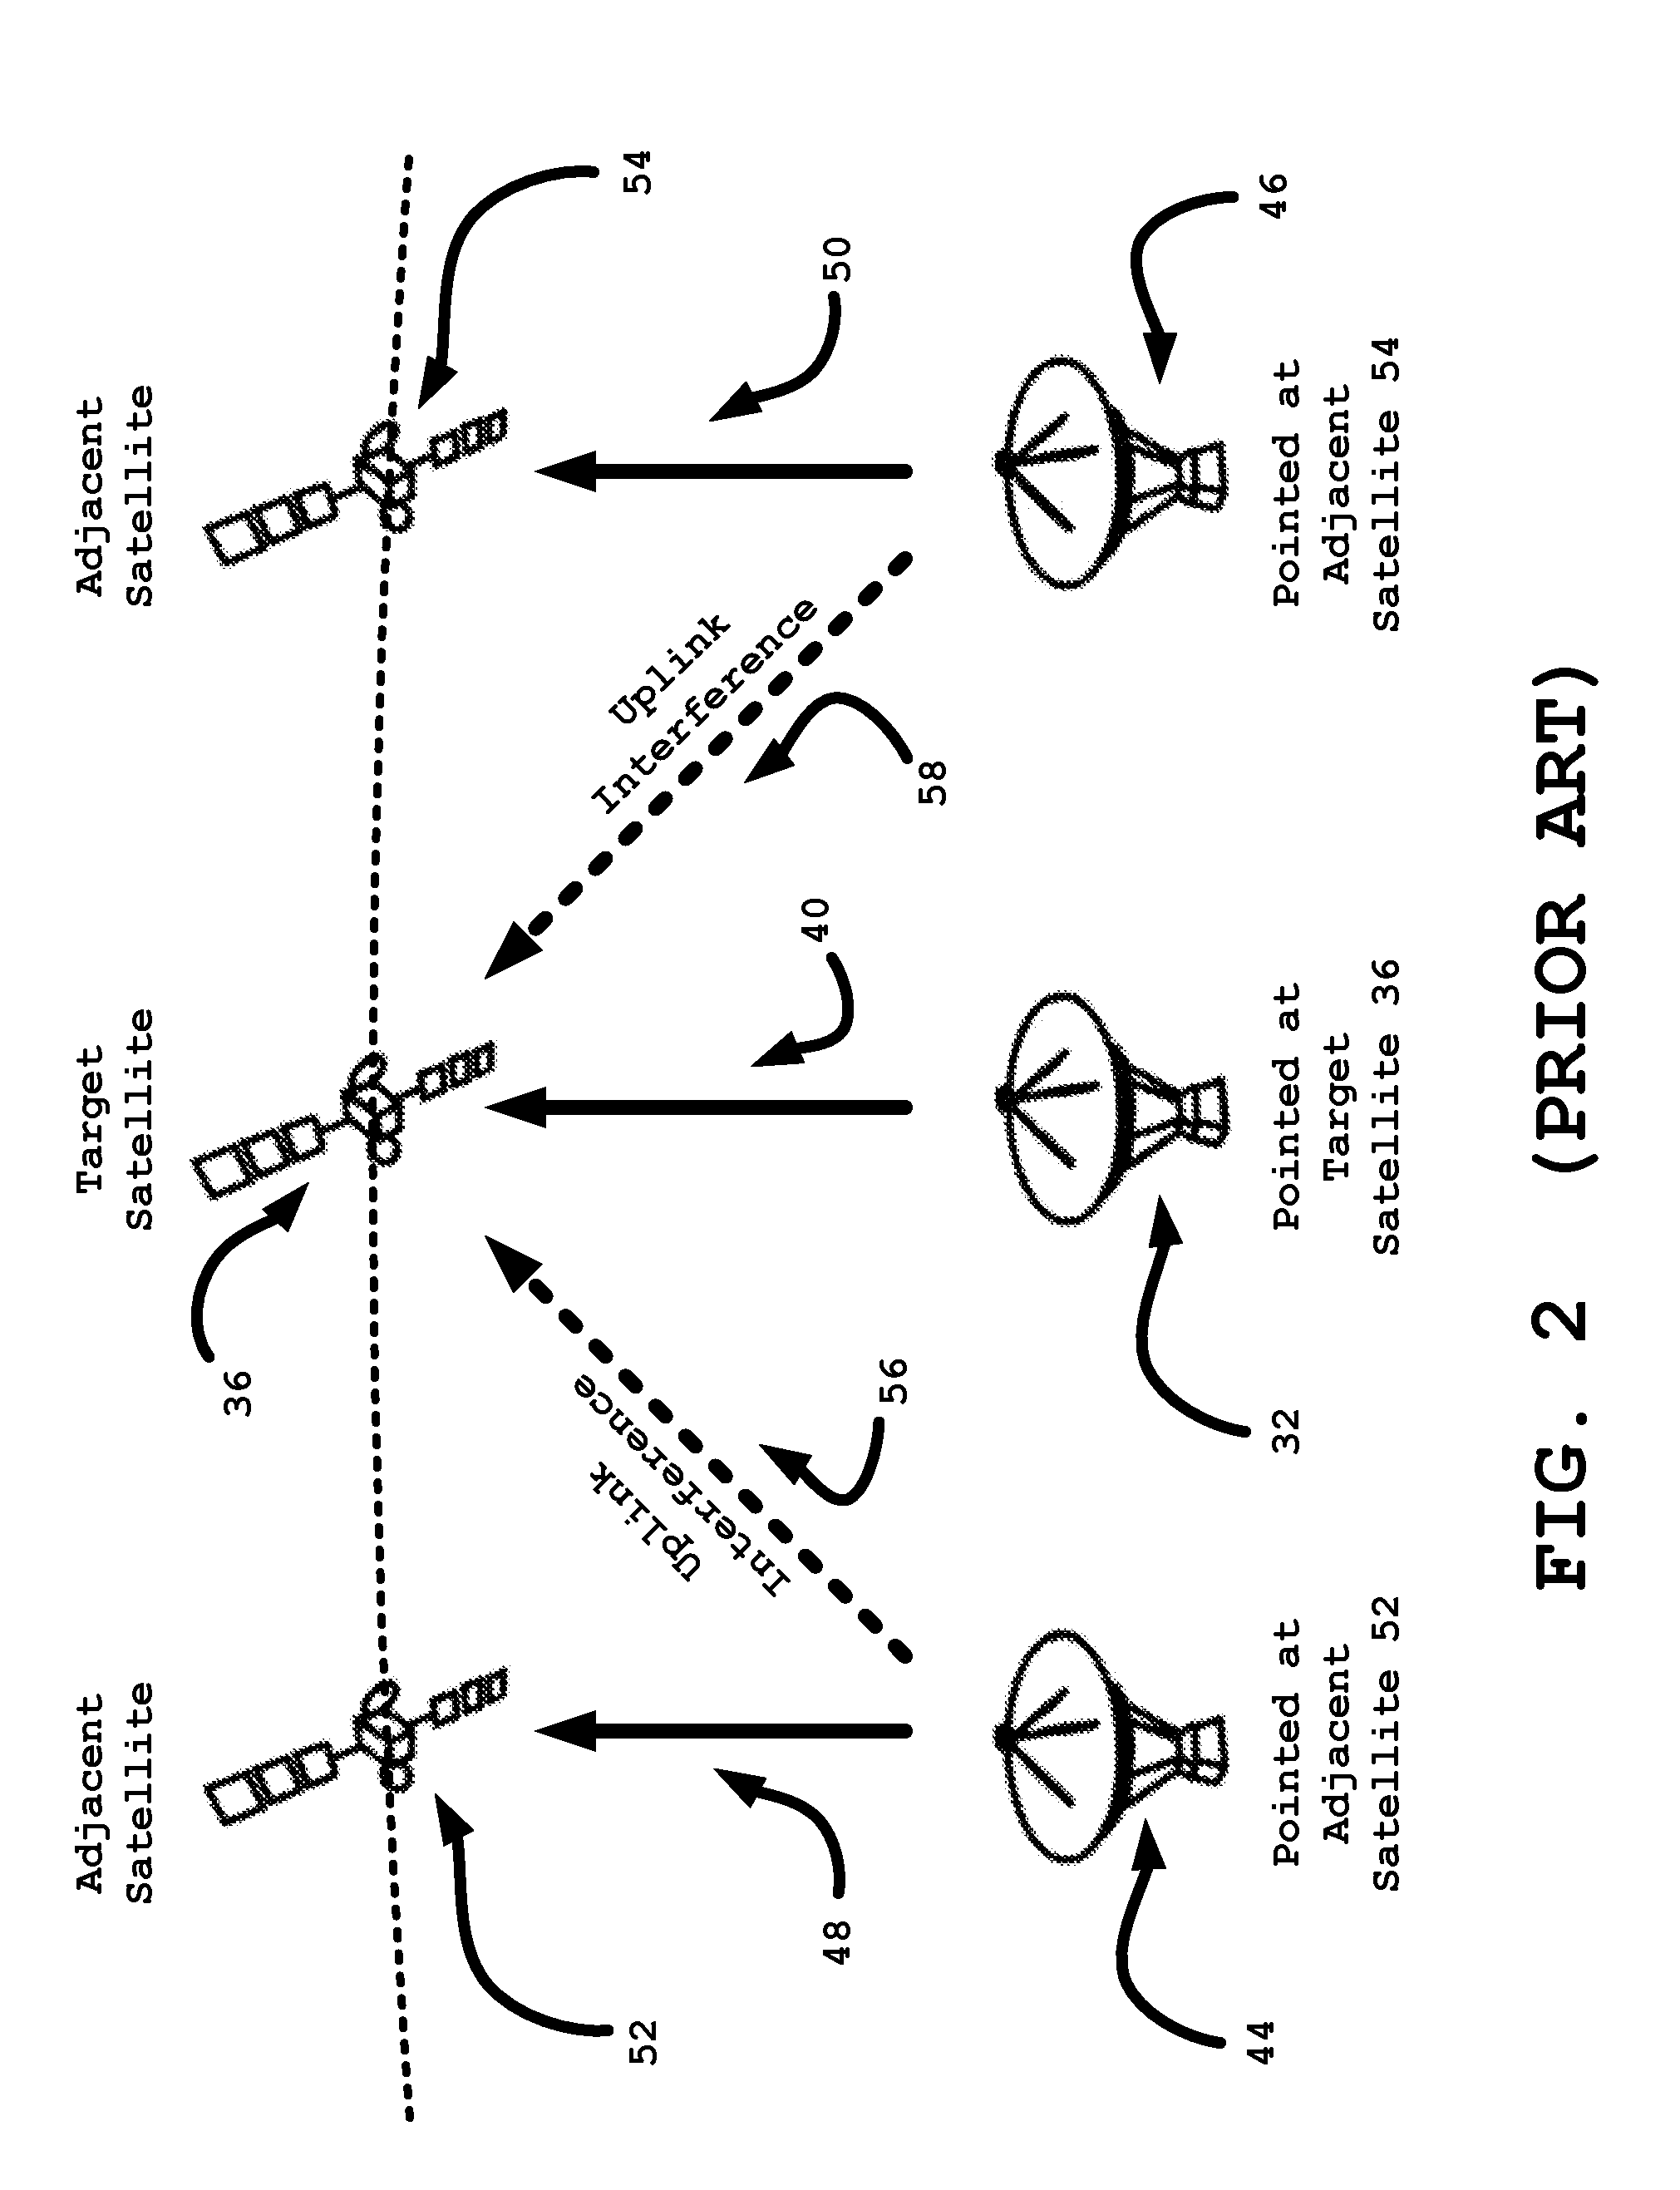 System and method for communicating via a satellite in an inclined geosynchronous orbit